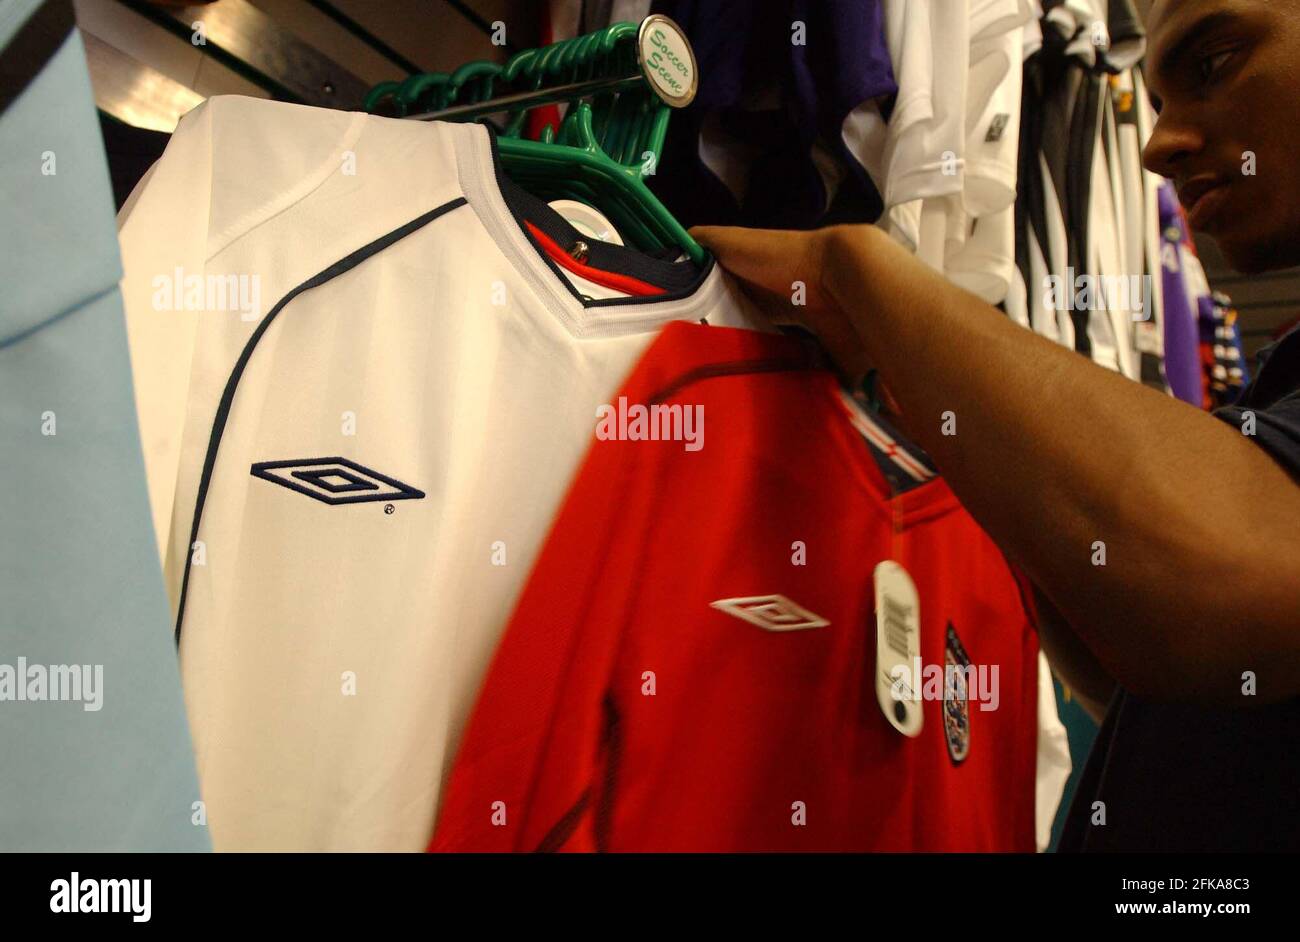 Umbro shirts on sale in Carnaby Street. Umbro has recently been accused of  price fixing.16 May 2002 photo Andy Paradise Stock Photo - Alamy